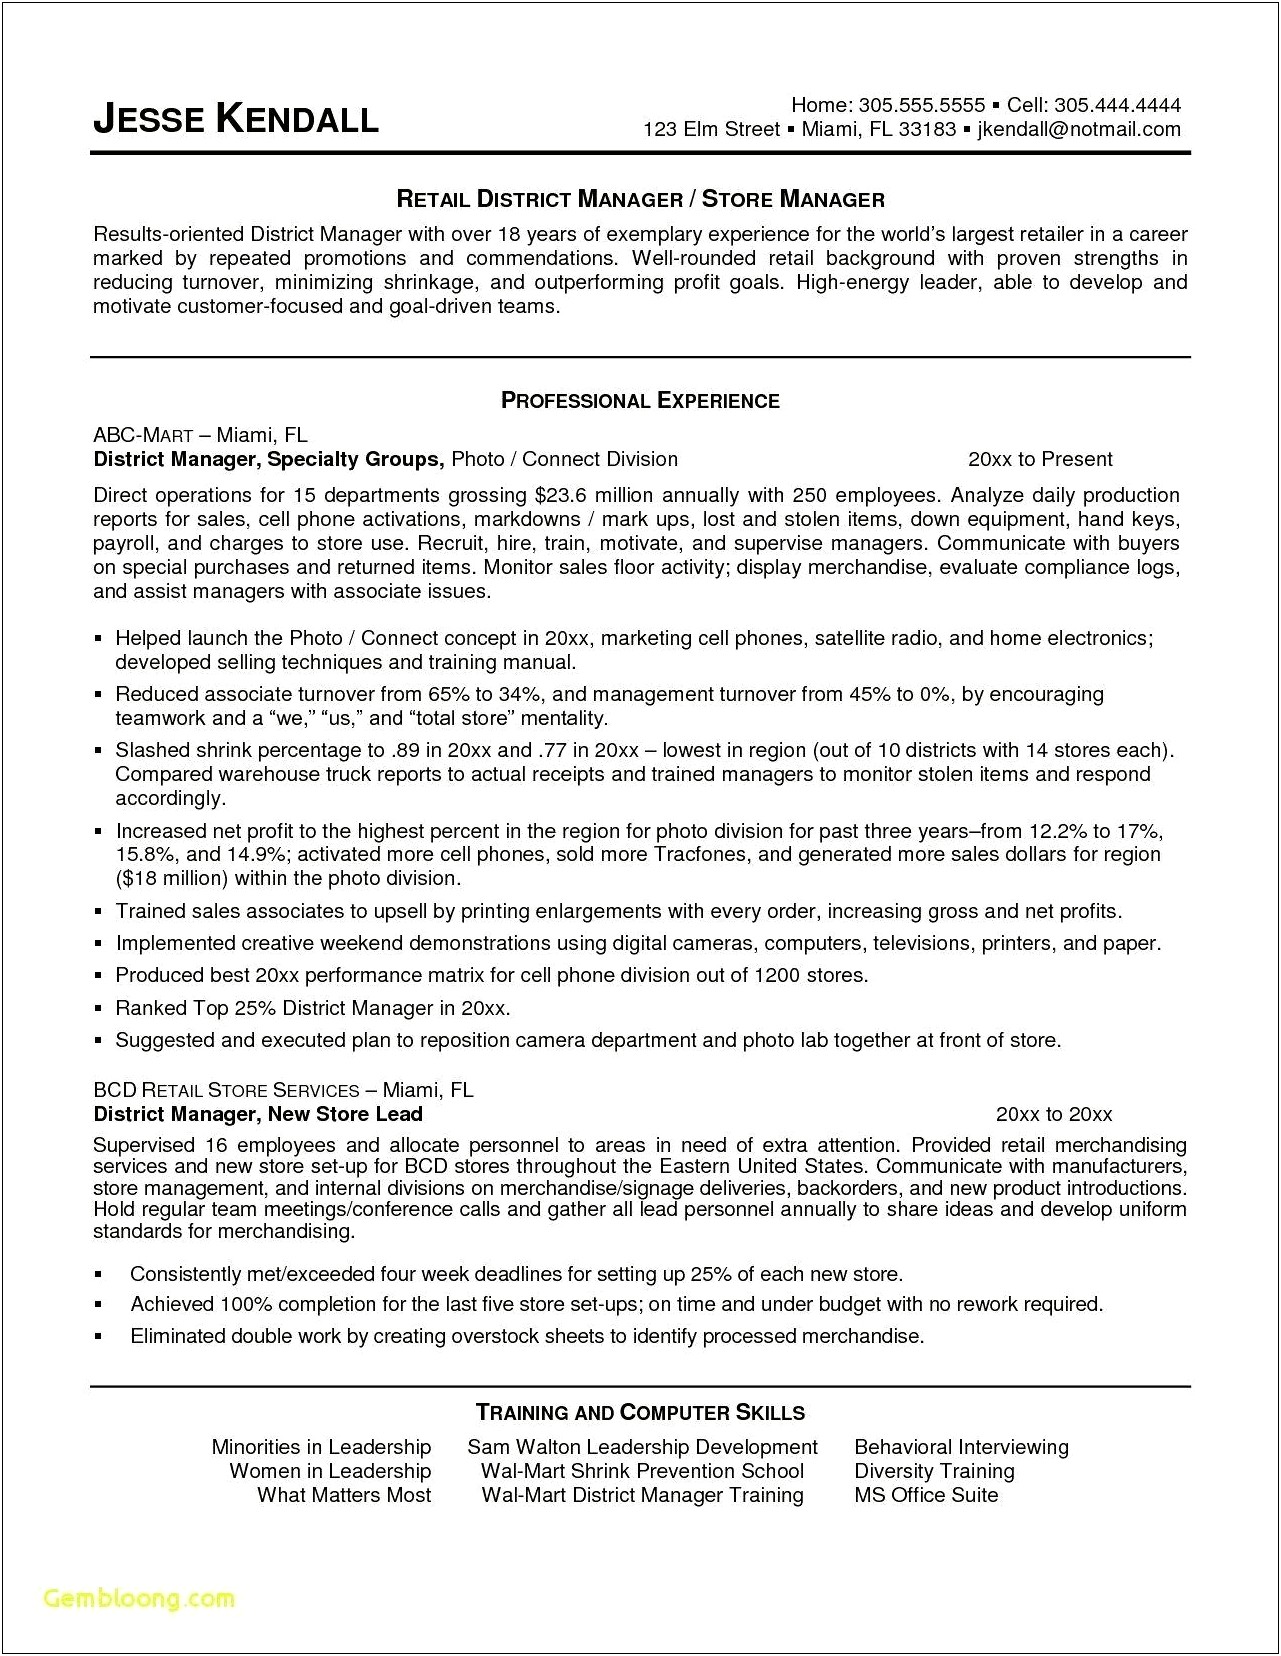 Simple Resume Objective For Retail